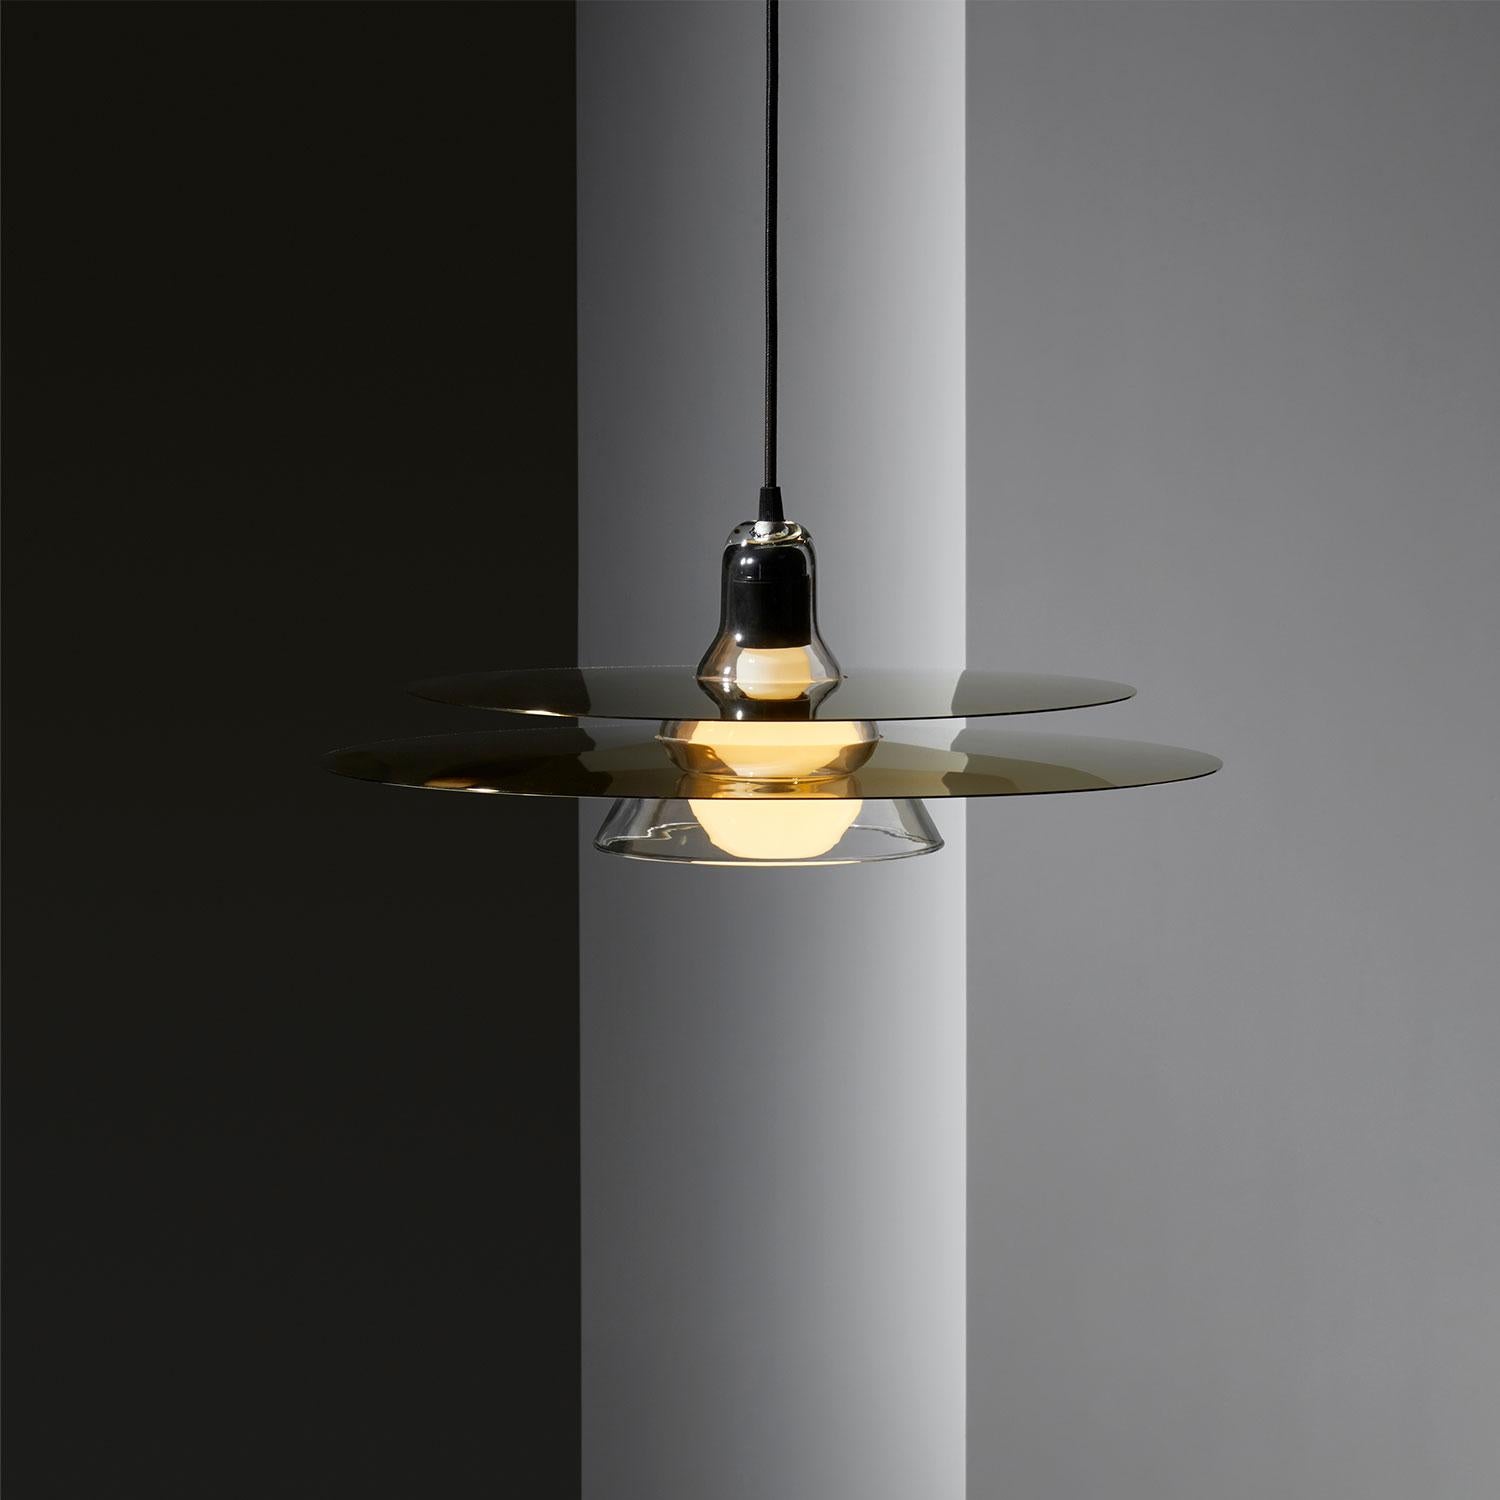 Cymbal pendant lamp by Jean-Baptiste Souletie
Dimensions: D 47 x H 15 cm
Materials: Painted solid steel 


Cymbal is a simple yet intriguing pendant lamp. Cymbal shaped disks of black, chrome or gold steel diffract the light in every direction